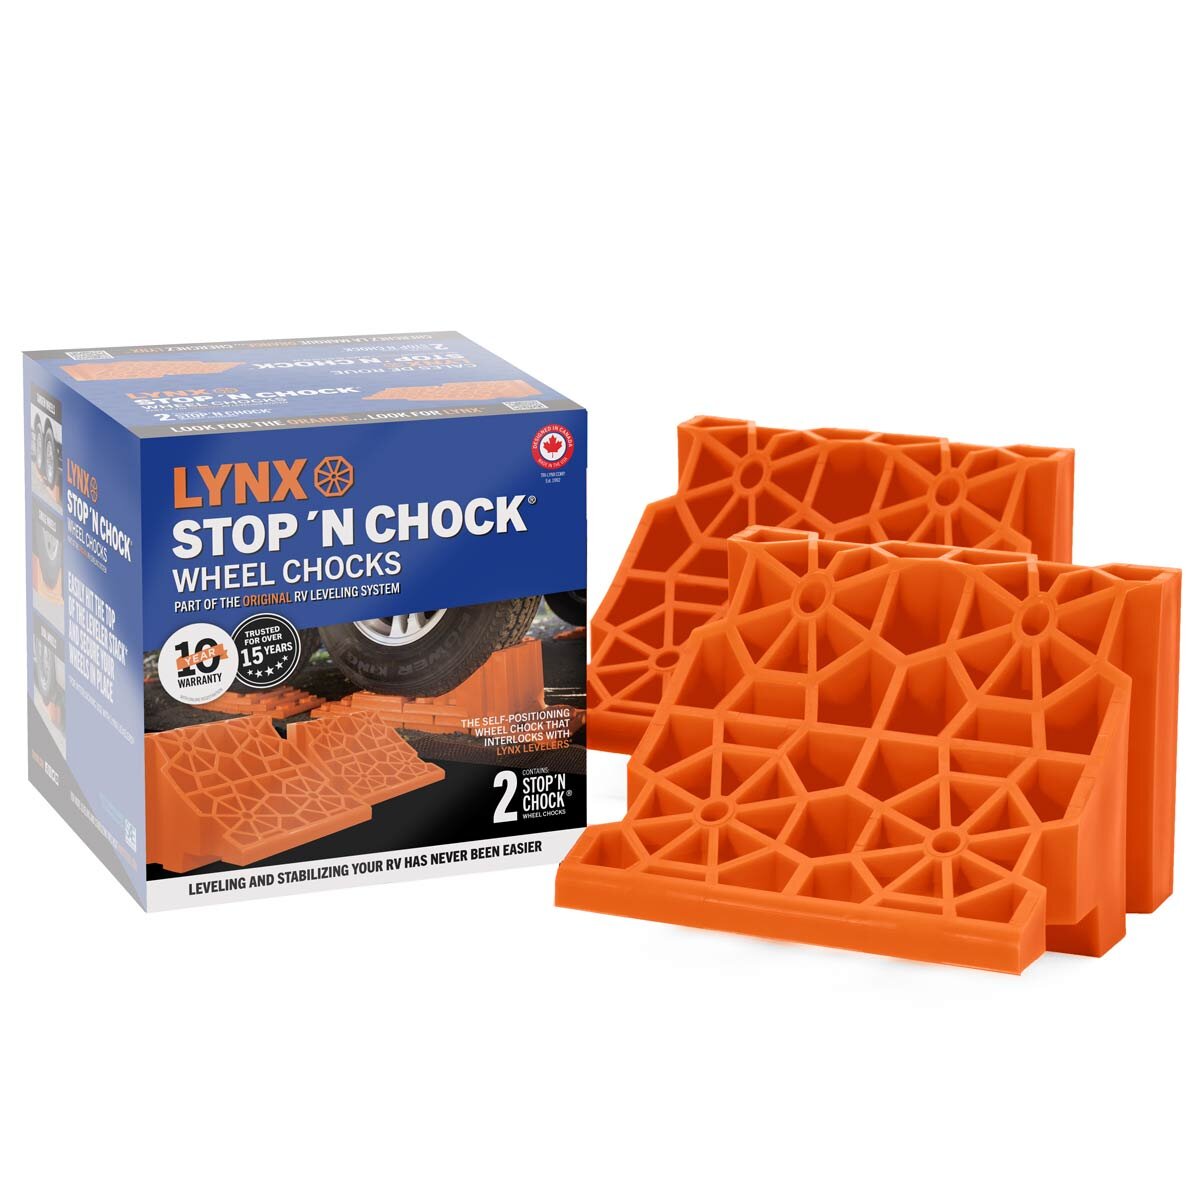 lynx-00018C-E_stop-n-chock_product-preview-1.jpg